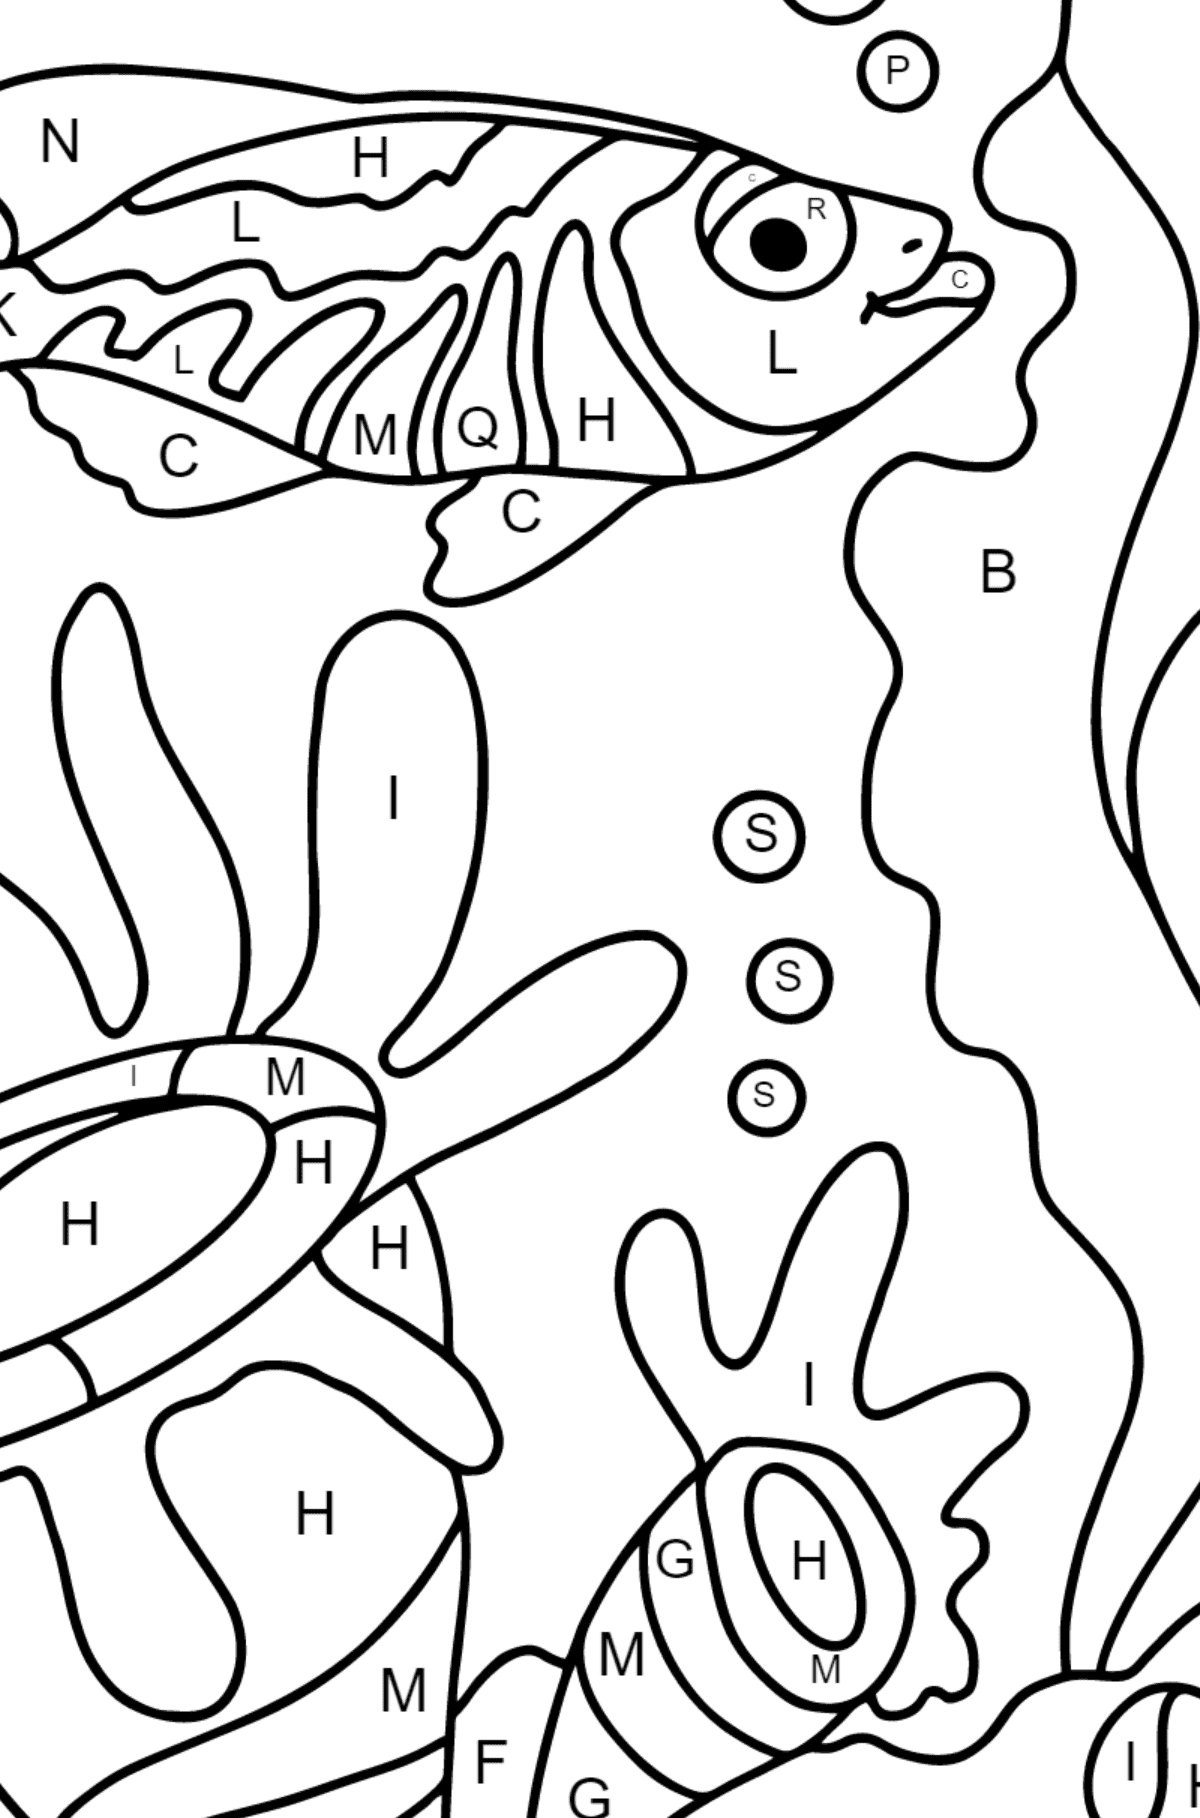 Coloring Page - A Fish is Swimming past the Corals - Coloring by Letters for Children